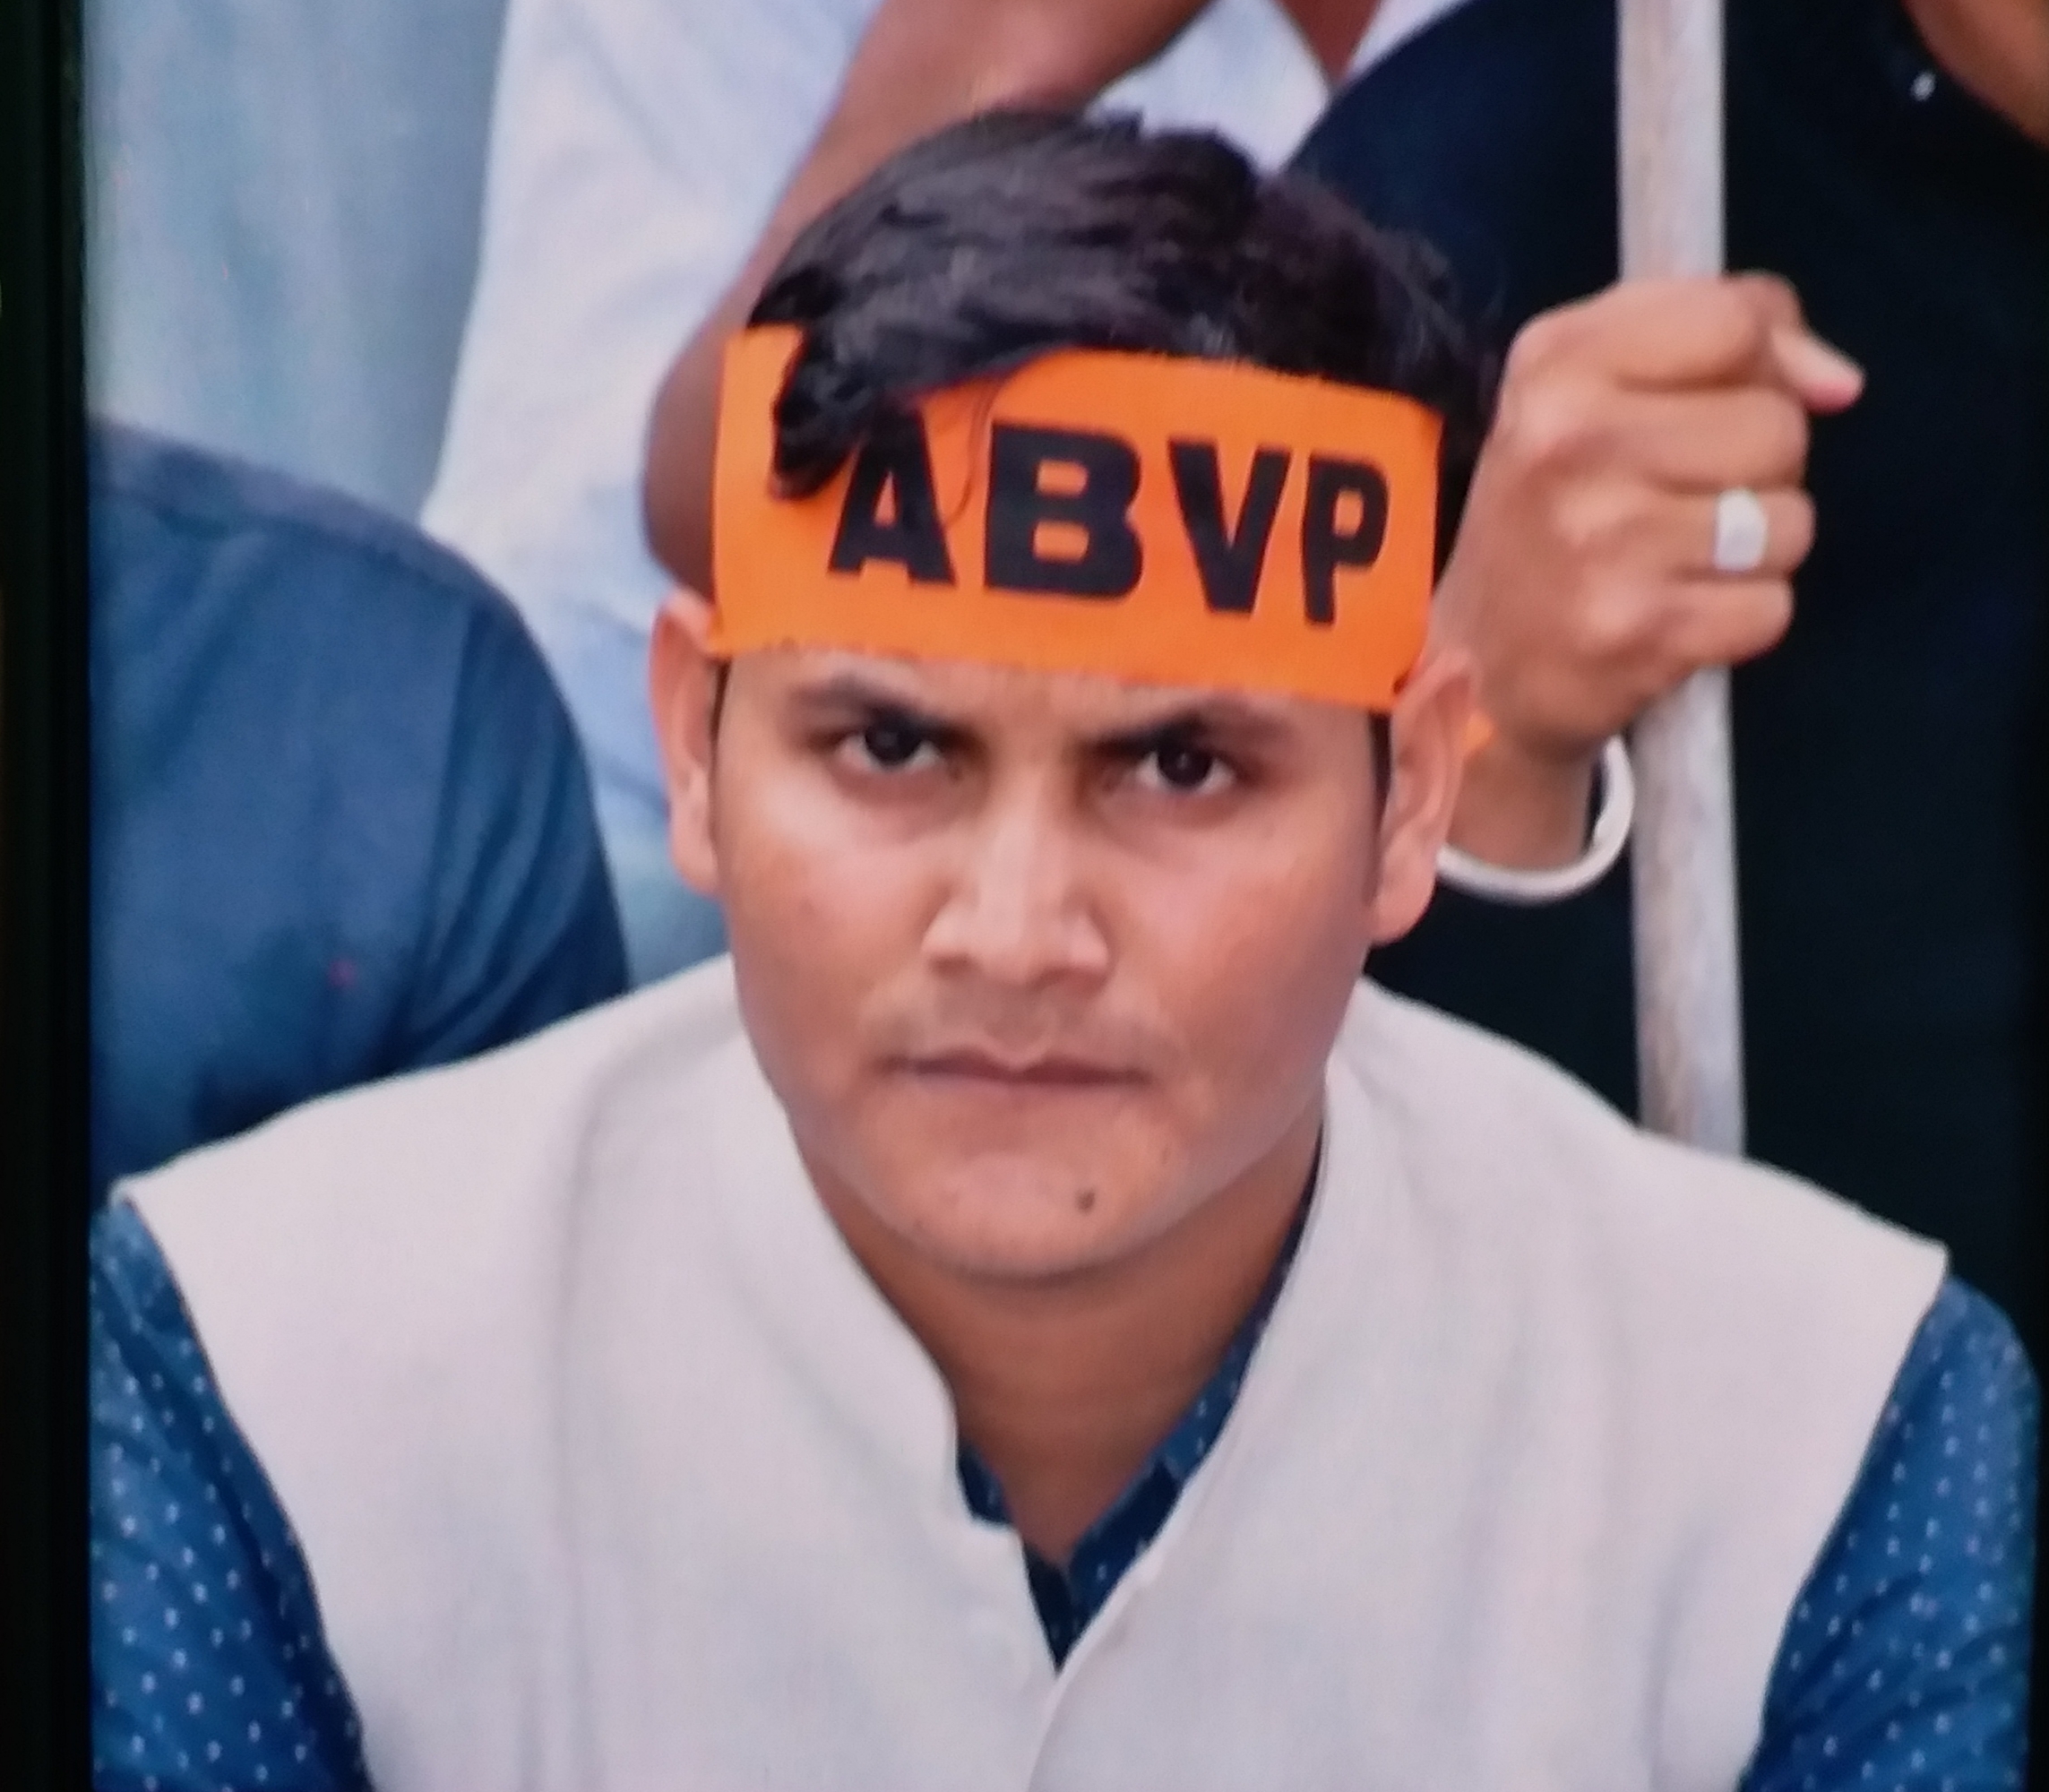 ABVP declared candidate